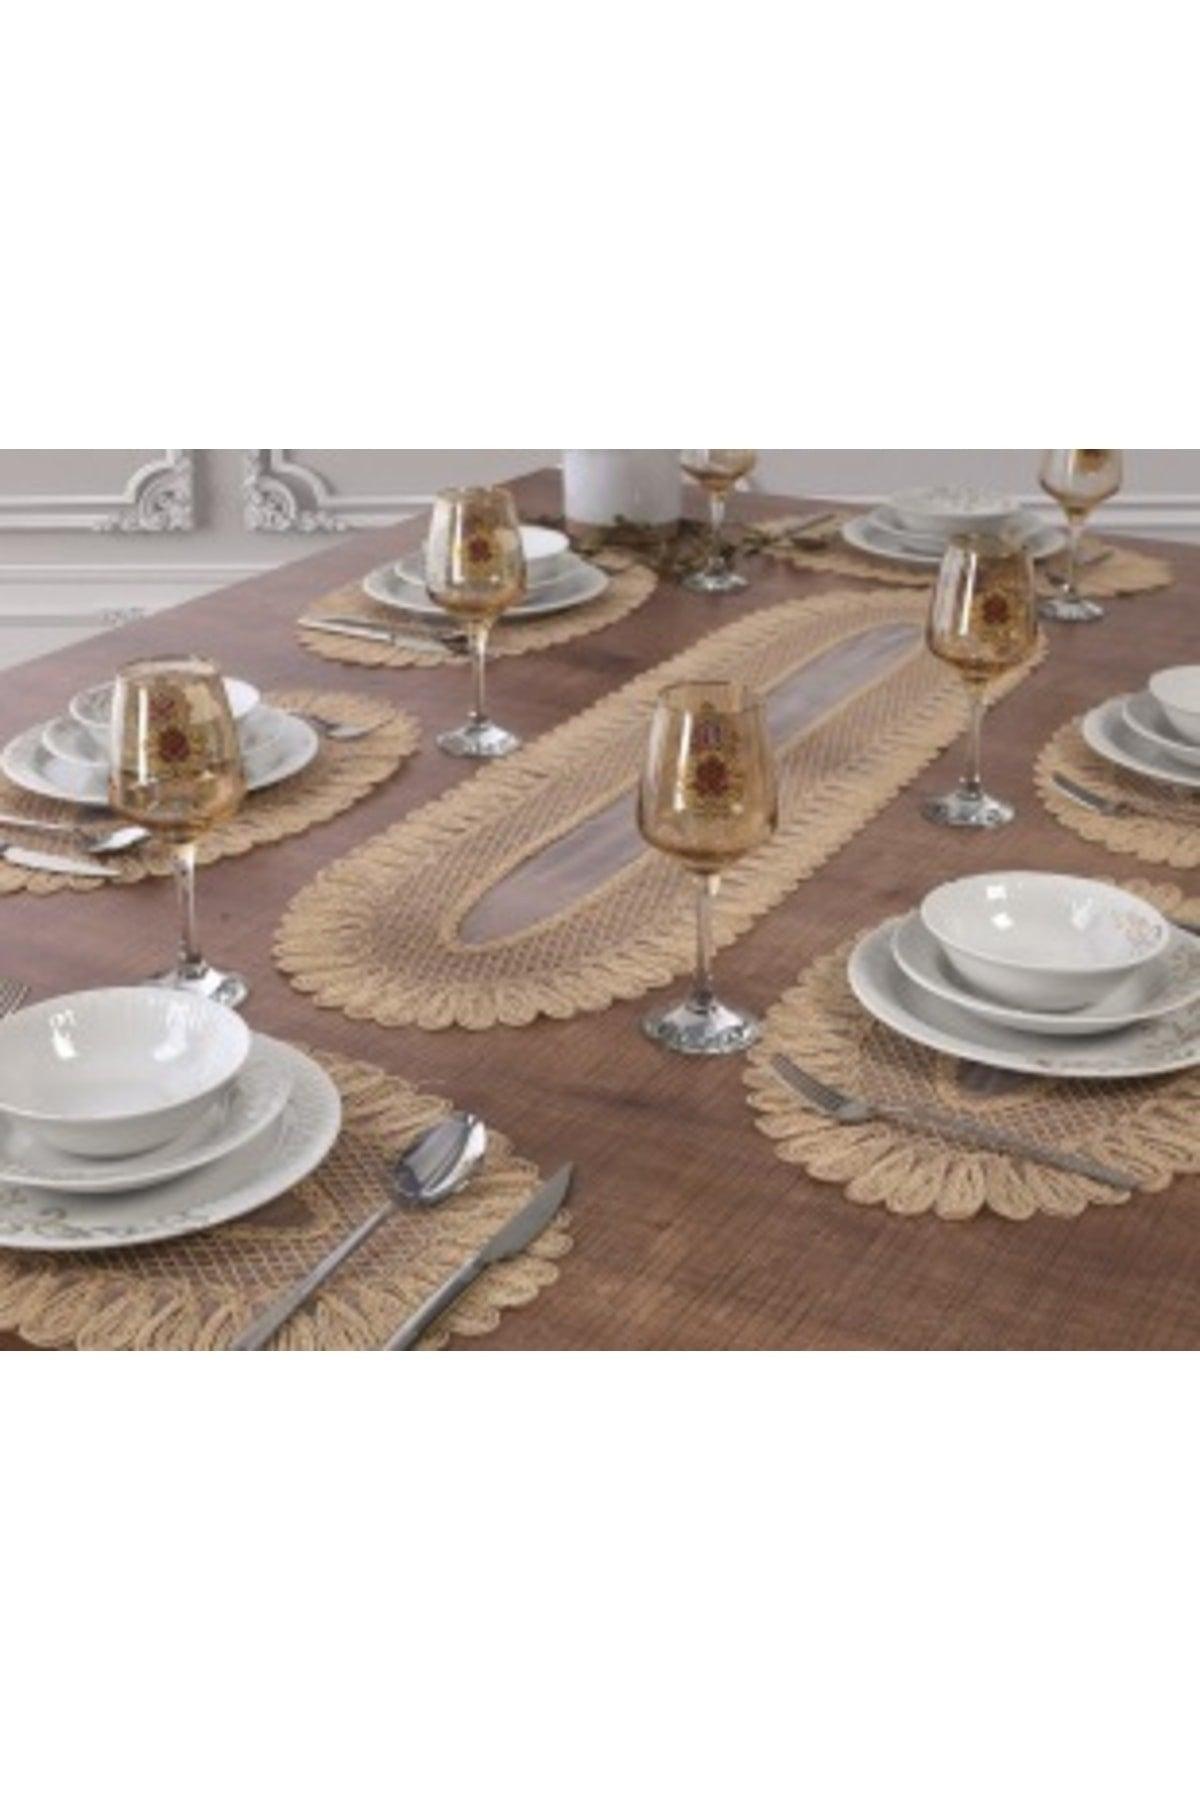 Placemat Plate And Runner Set 6 Person Set Embroidered Vivien Beige 7 Piece Table And Presentation Set - Swordslife